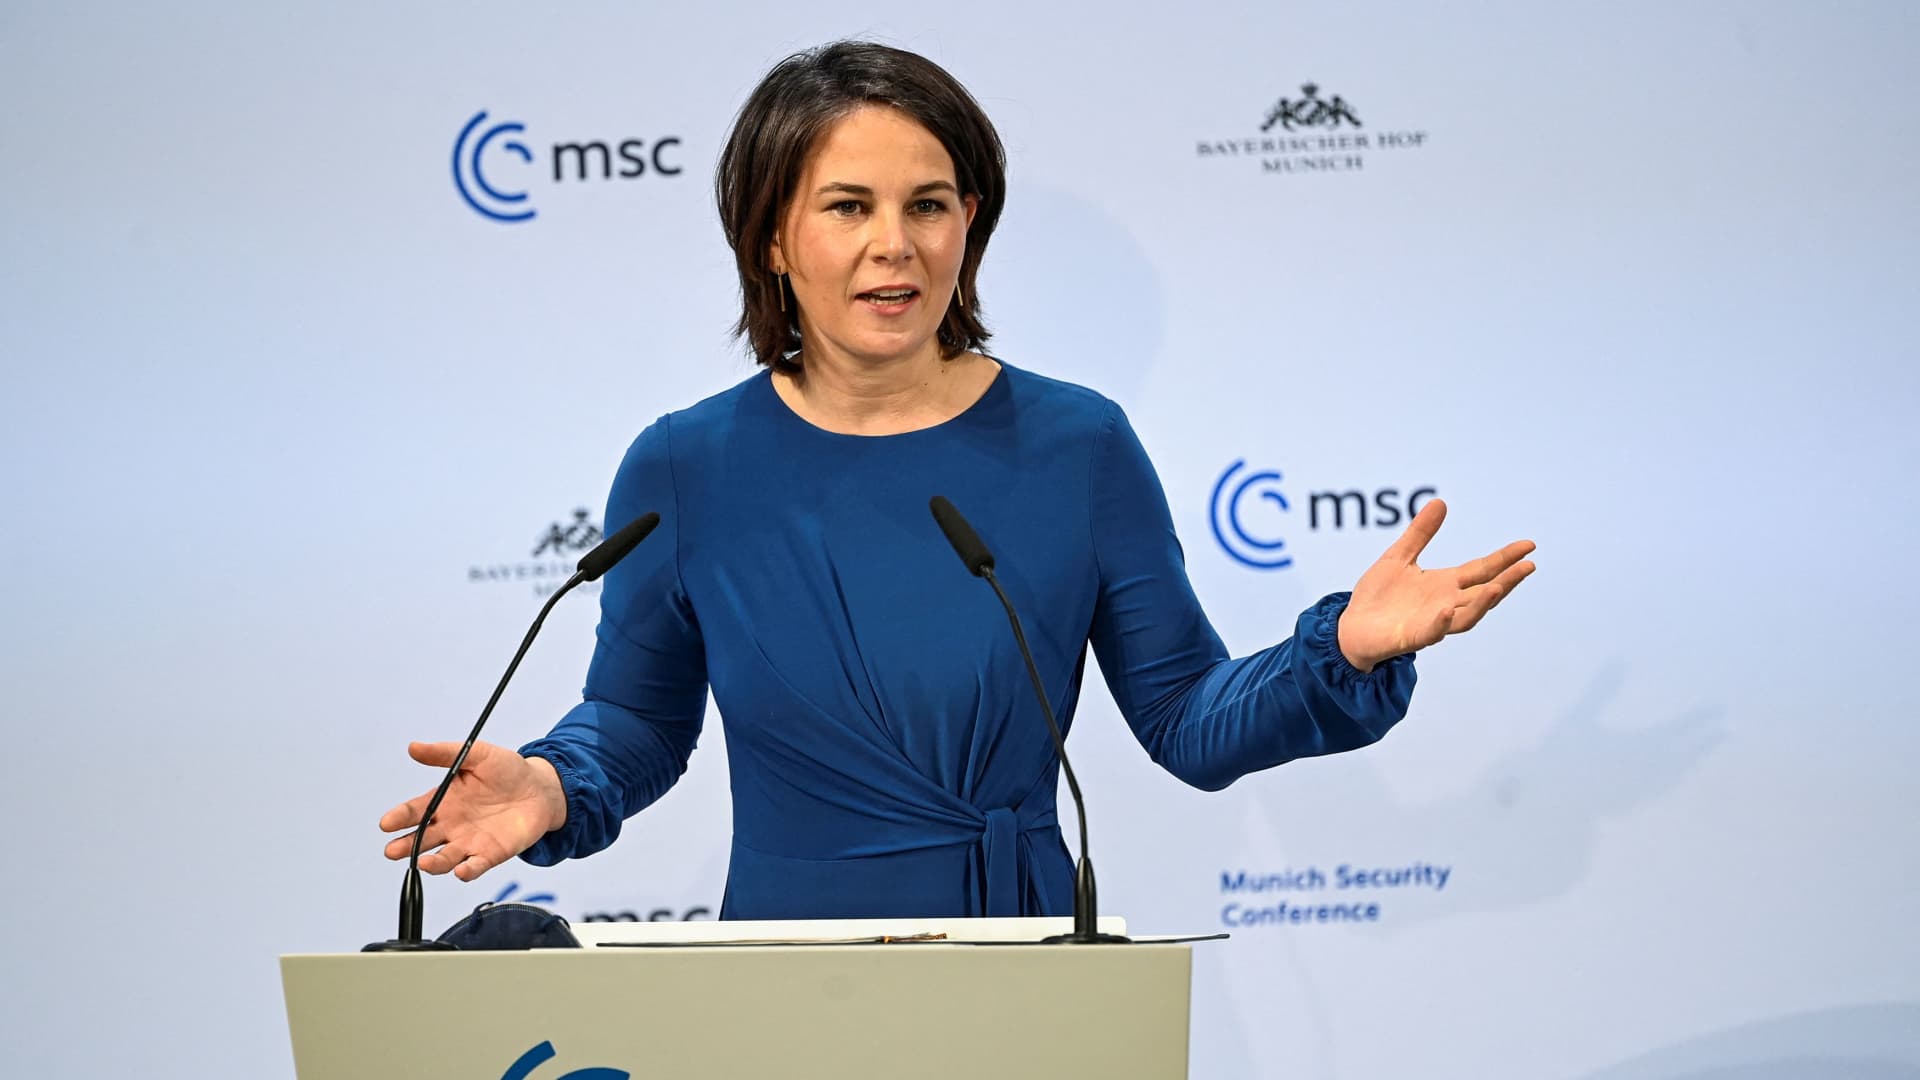 German Foreign Minister Annalena Baerbock speaks at the Munich Security Conference in Munich, Germany, February 18, 2022.